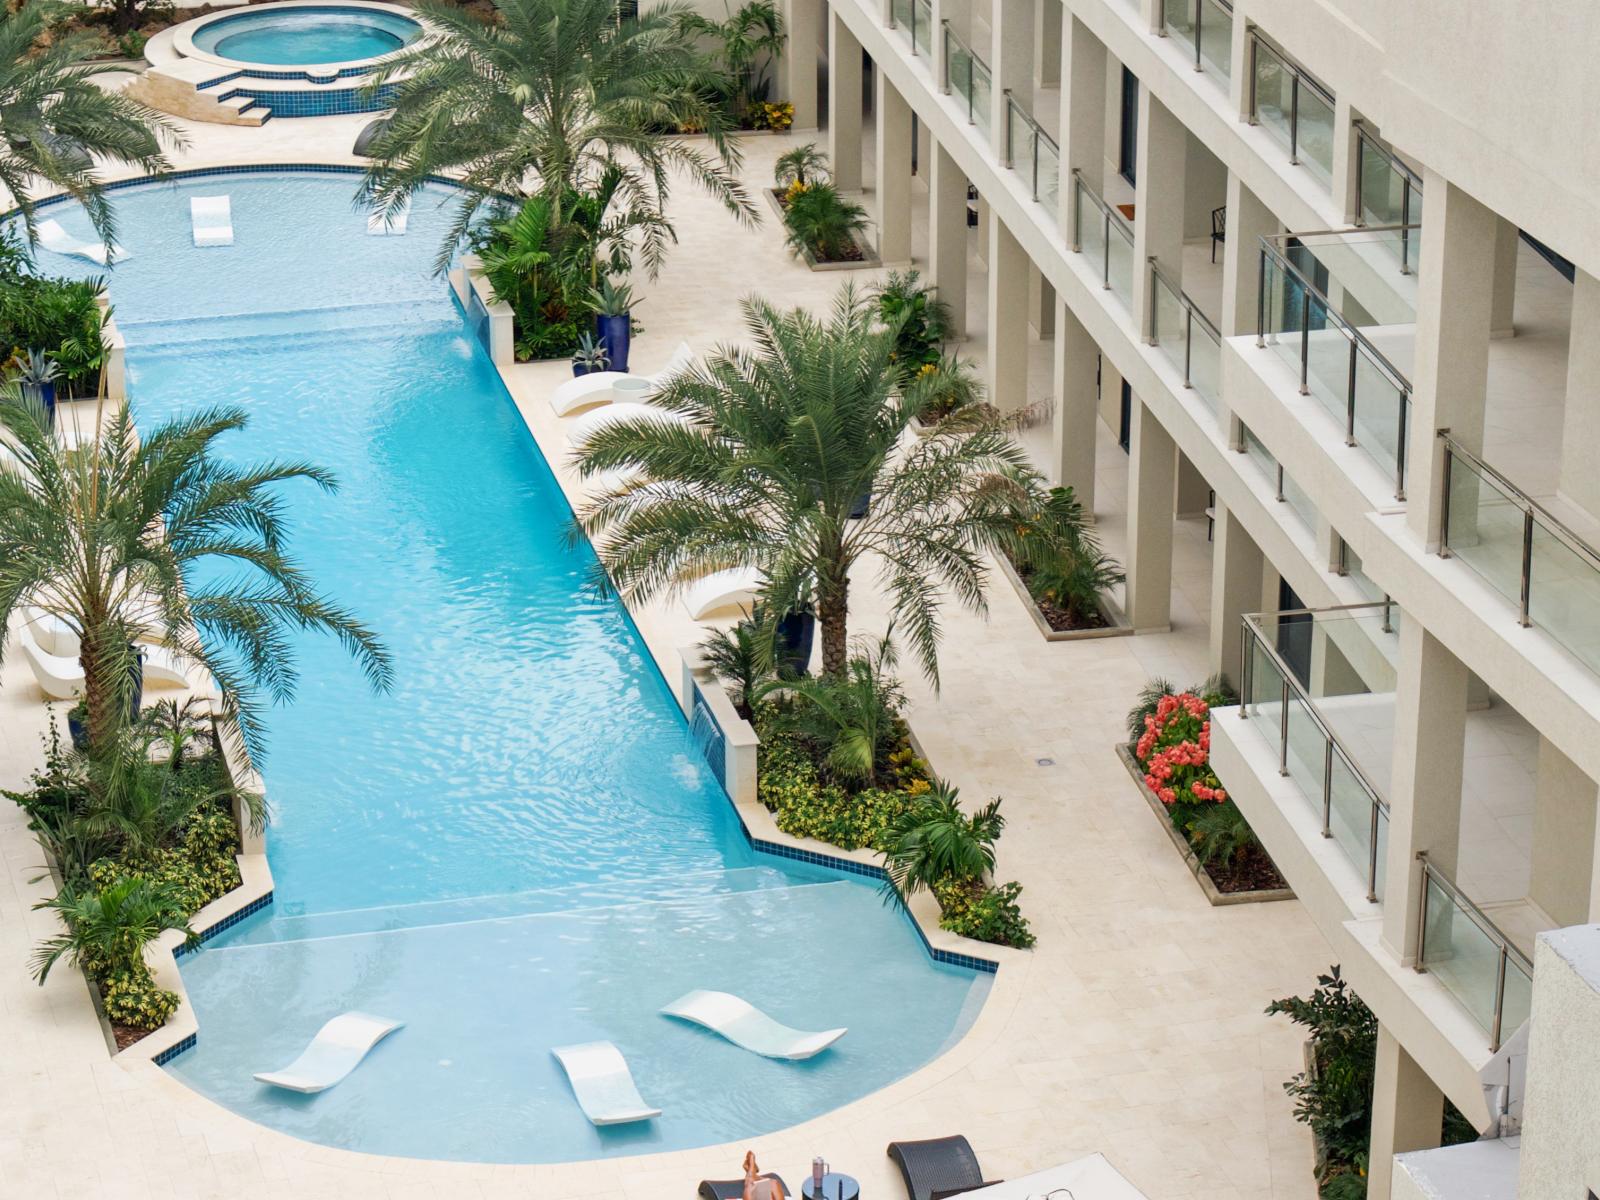 Dive into the lap of luxury – an aerial view of our serene pool oasis. (1)